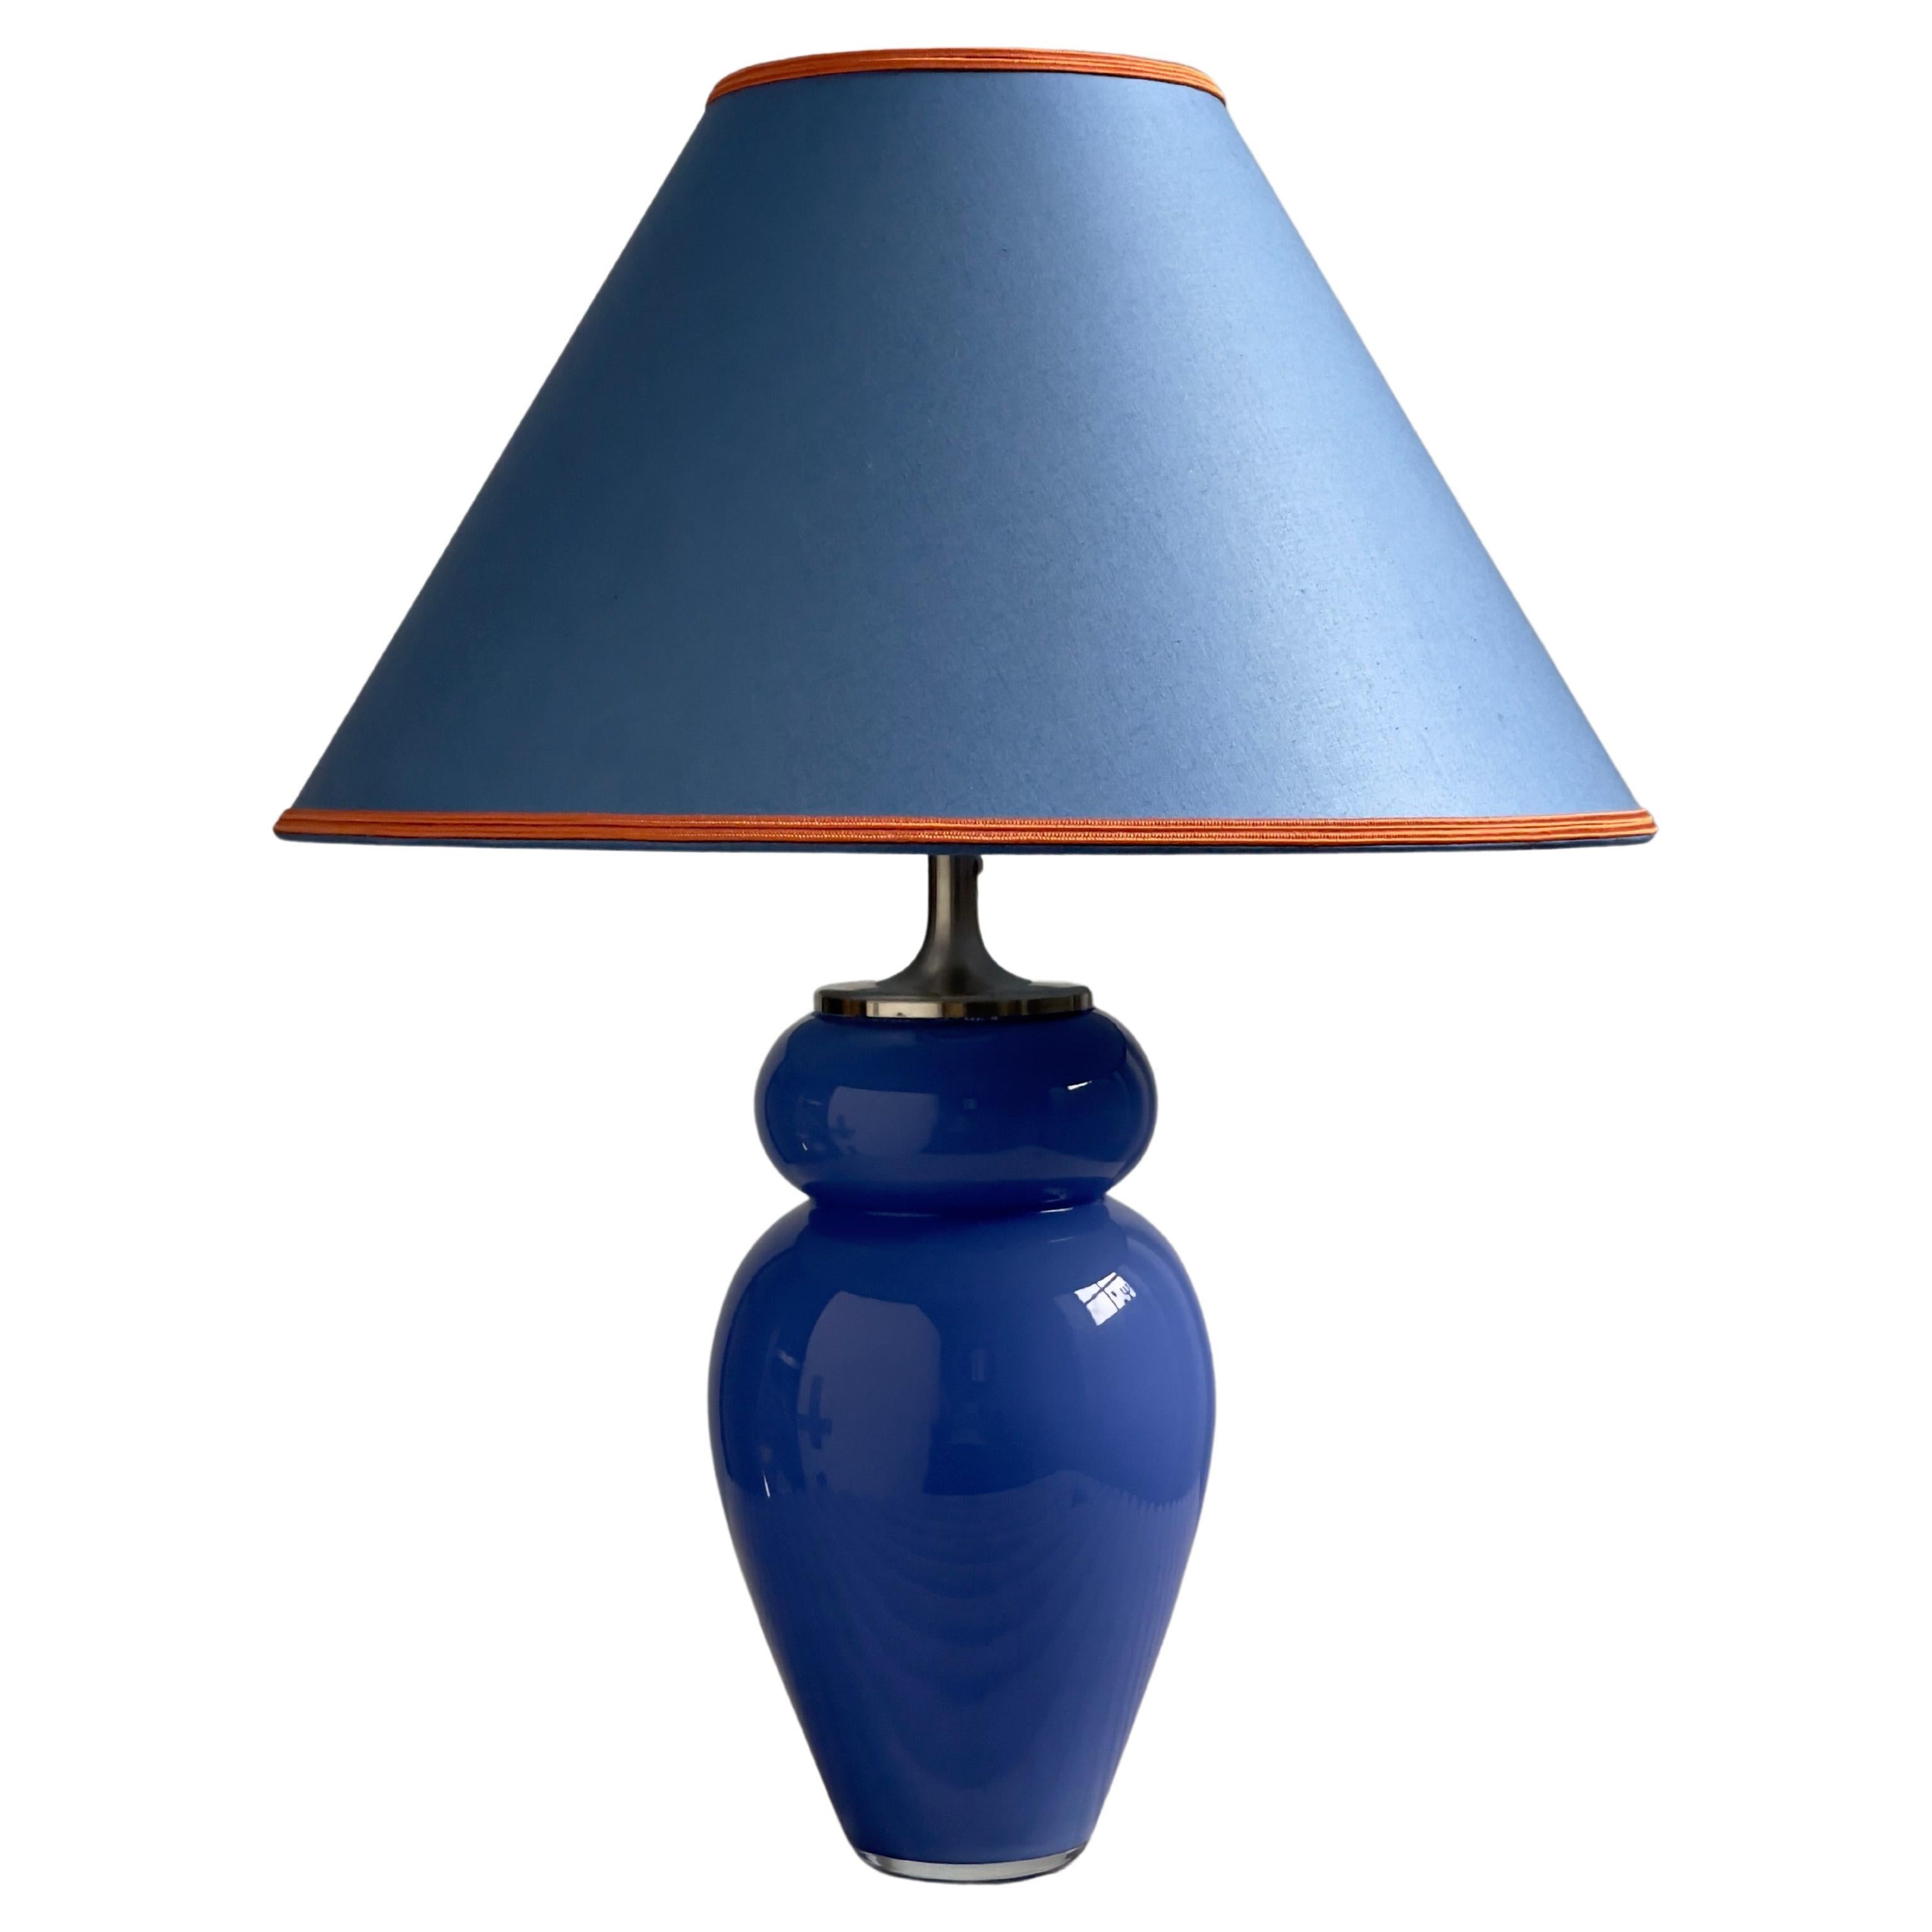 1980s Blue Crystal Glass Table Lamp with Blue Shade by Royal Copenhagen, Denmark For Sale